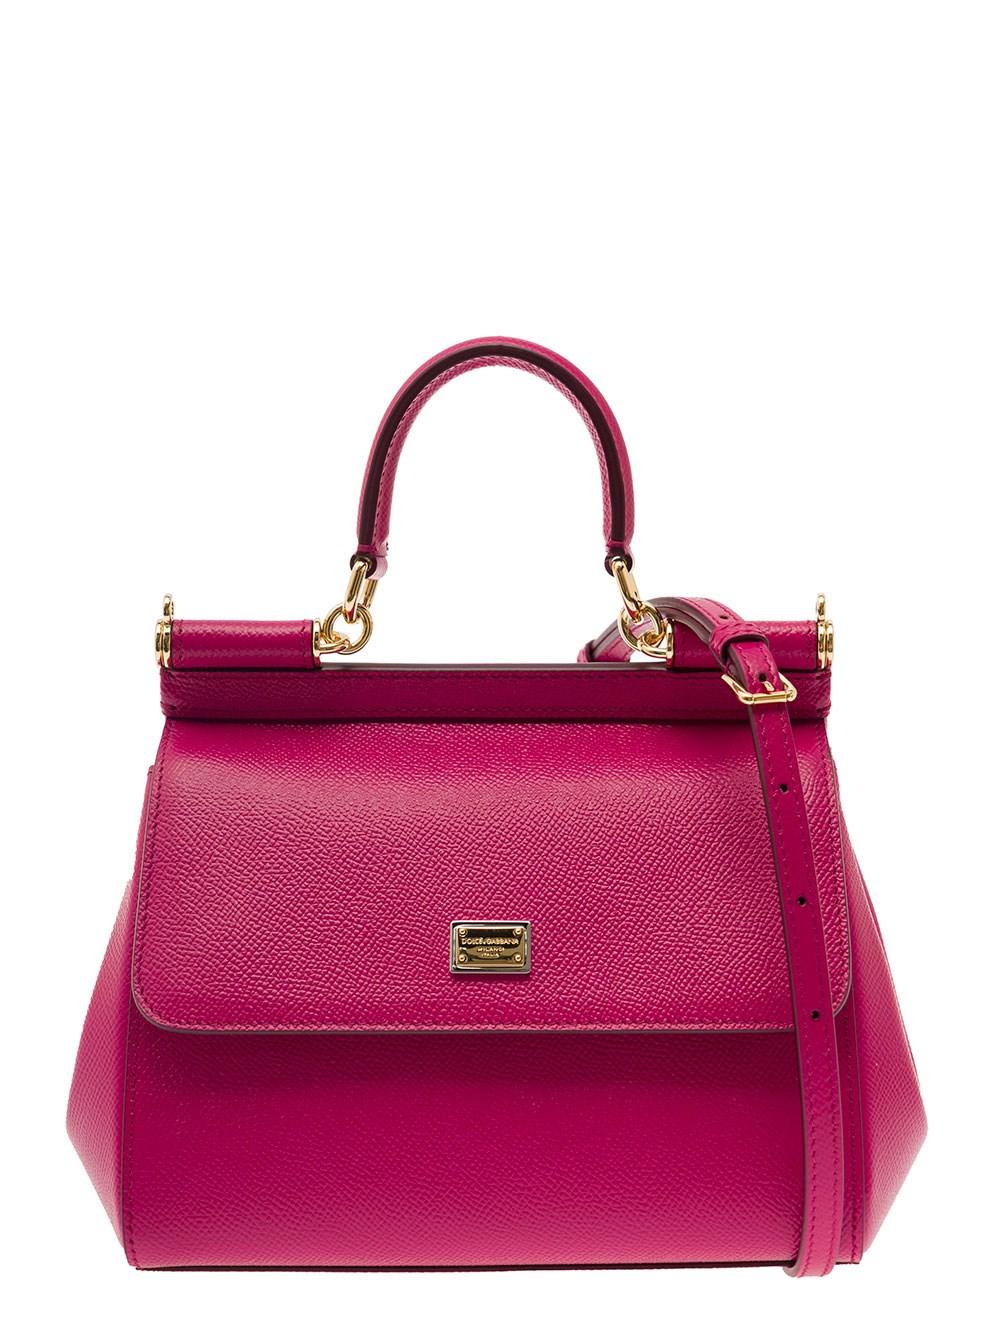 DOLCE & GABBANA Bag Purse MISS SICILY Pink Dauphine Leather Hand